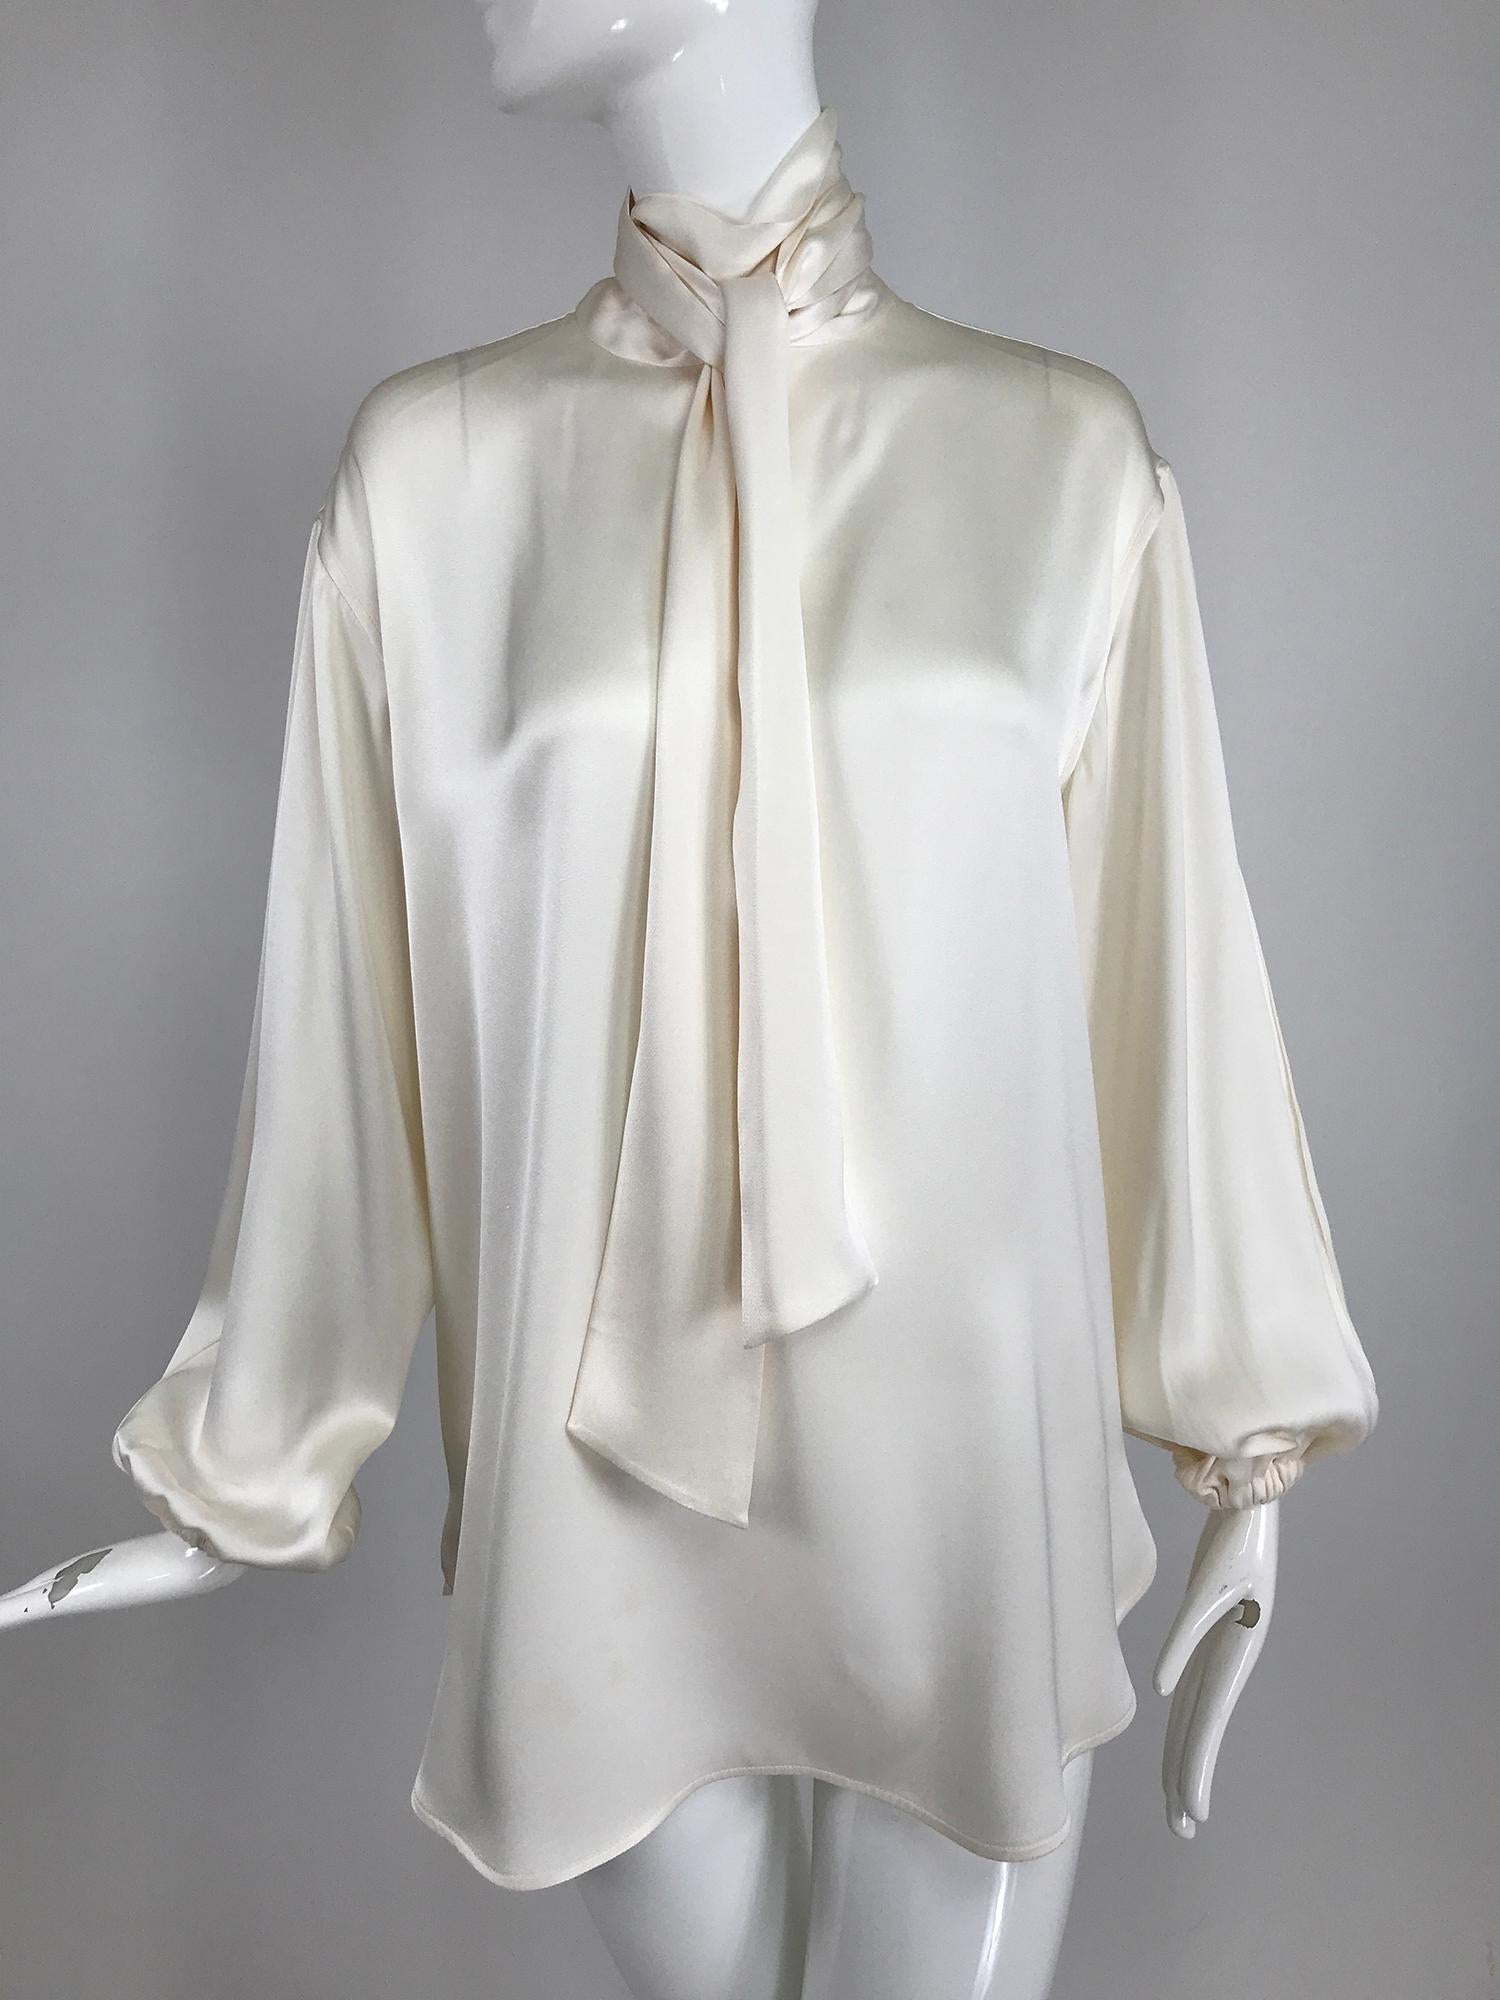 Celine candle light silk satin oversize tunic top with full sleeves, deep front vent and neck ties. This beautiful blouse looks great belted or worn loose. Pull on blouse has yoke back long full sleeves with cased elastic cuffs, shirt tail hem is a